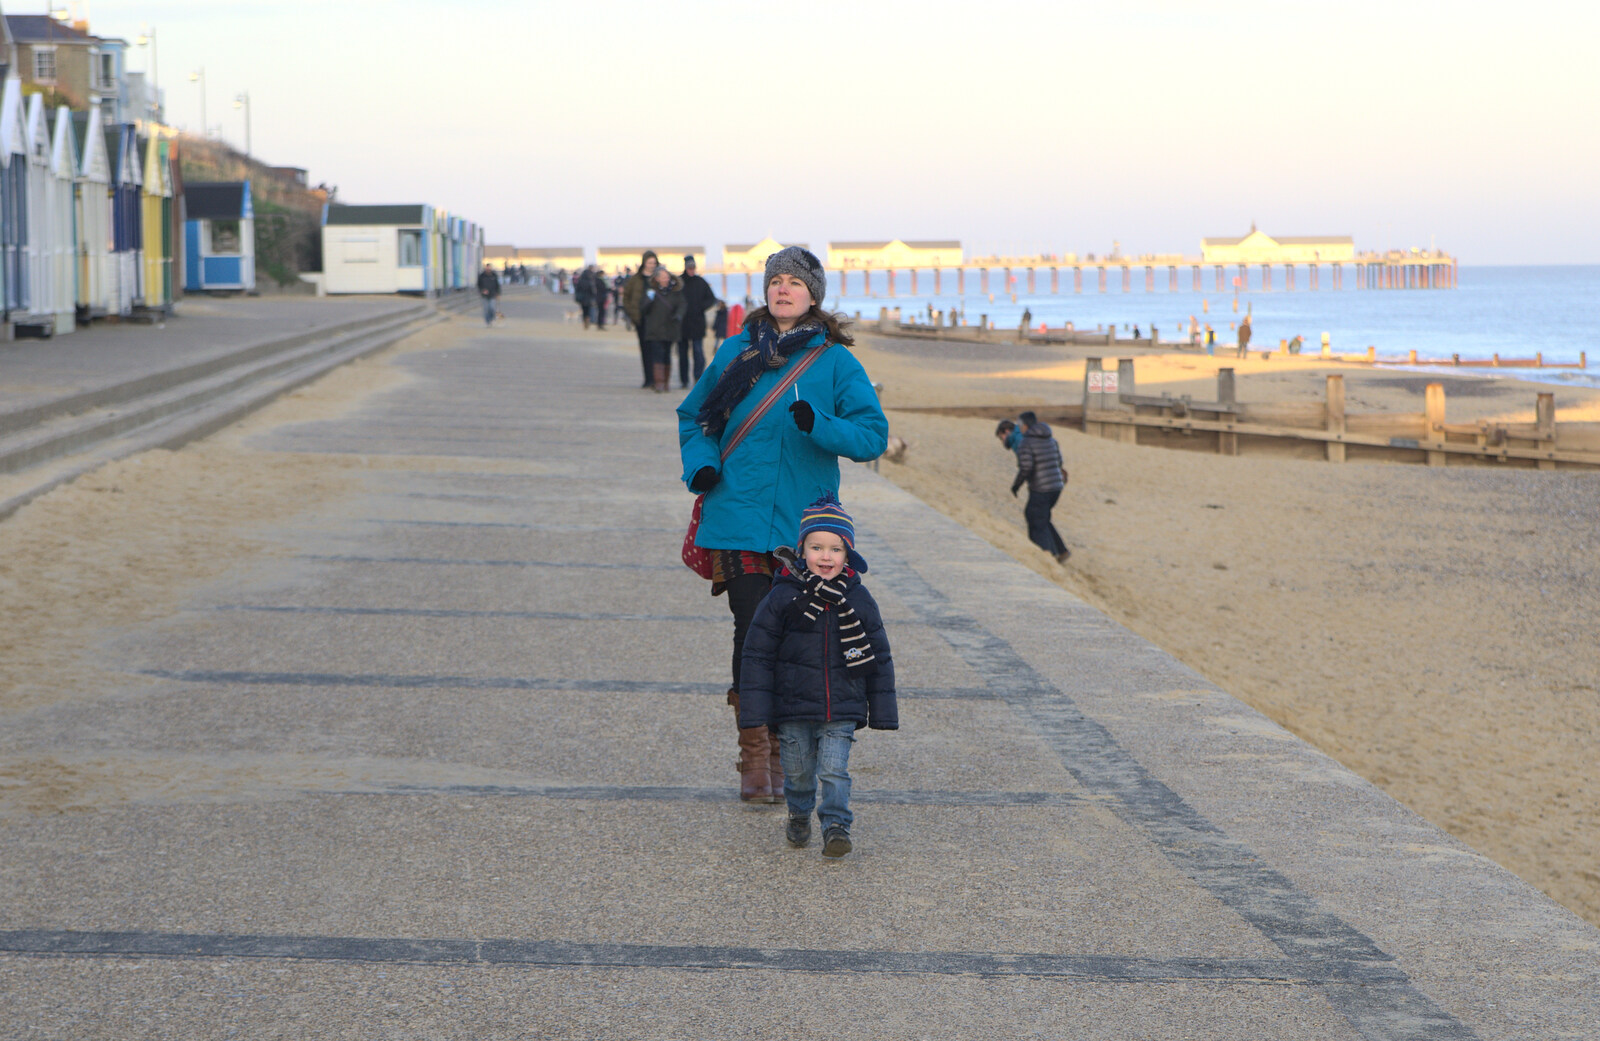 Isobel and Harry from Sunset on the Beach, Southwold, Suffolk - 30th December 2014